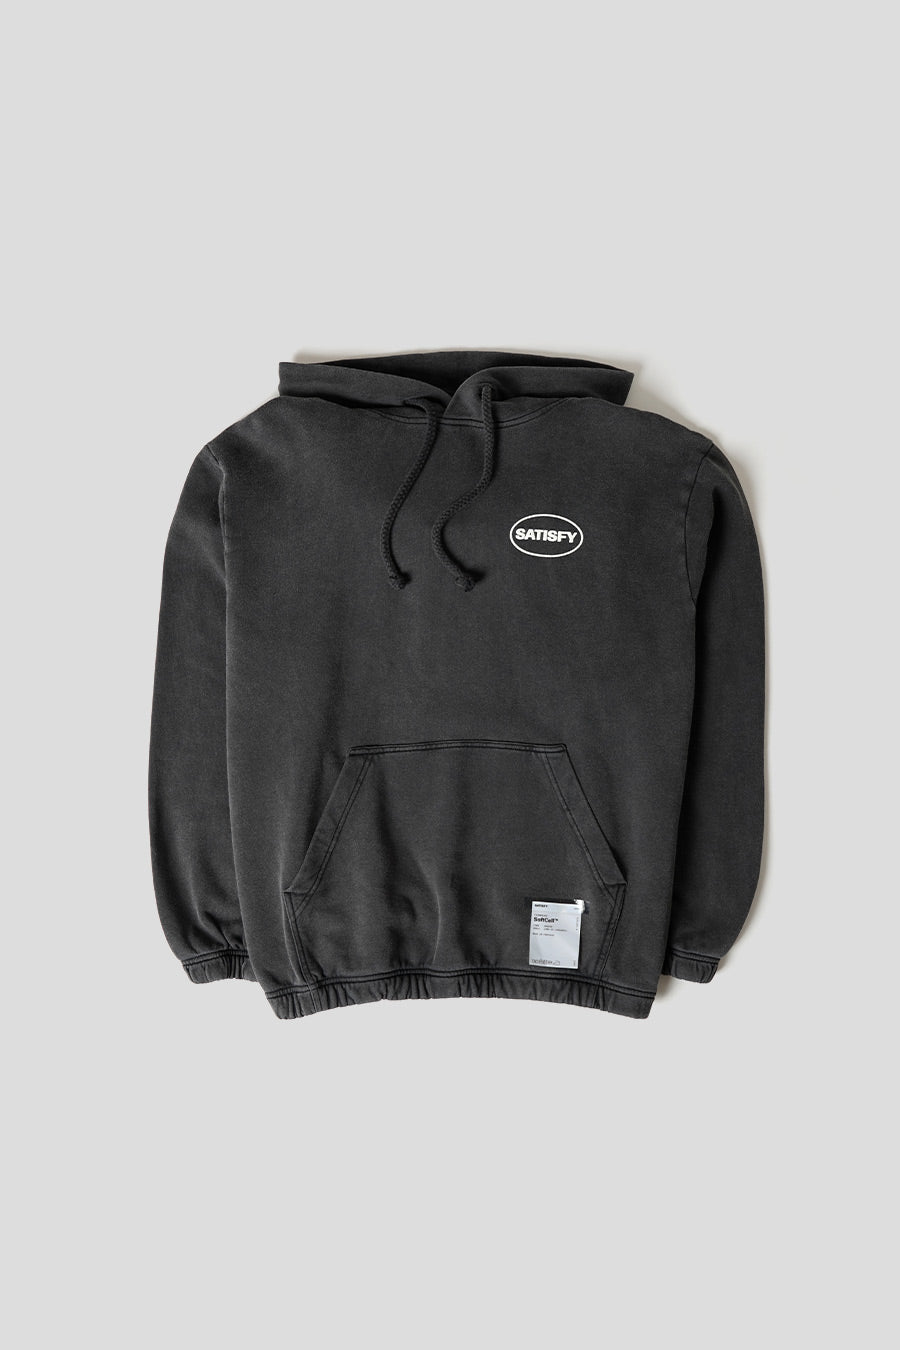 SATISFY - AGED BLACK SOFTCELL HOODIE  - LE LABO STORE